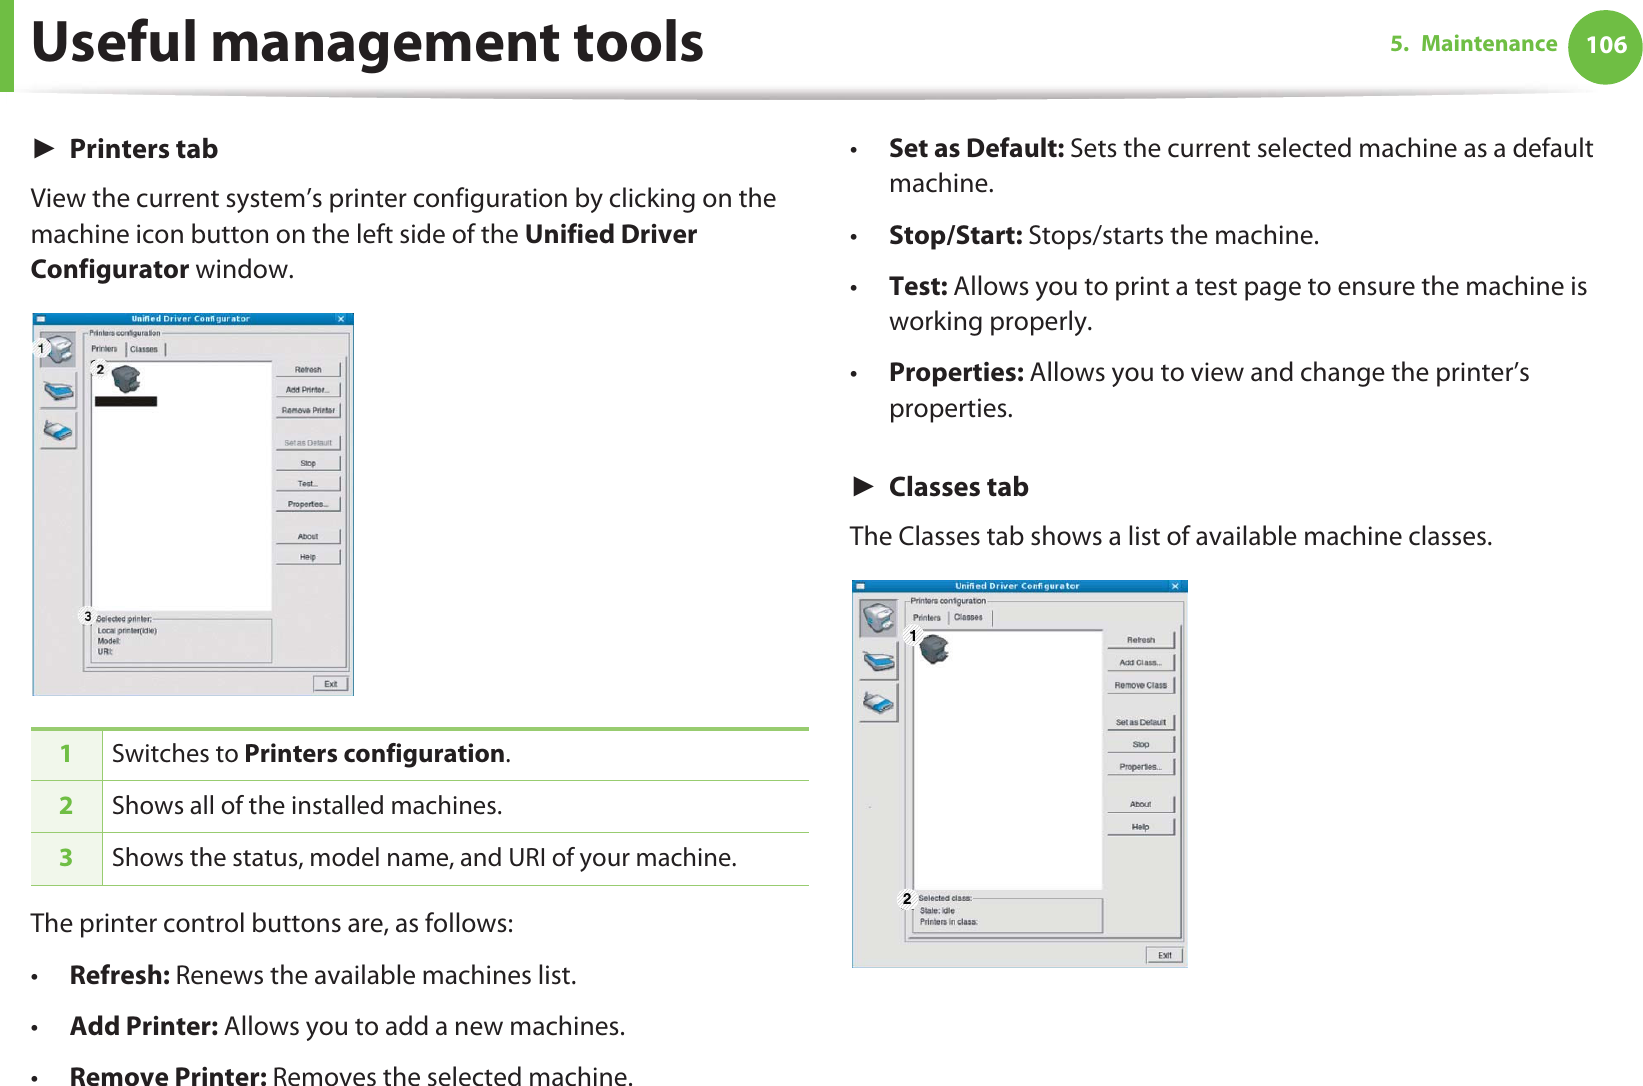 Useful management tools 1065. MaintenanceŹPrinters tabView the current system’s printer configuration by clicking on the machine icon button on the left side of the Unified Driver Configurator window.The printer control buttons are, as follows:•Refresh: Renews the available machines list.•Add Printer: Allows you to add a new machines.•Remove Printer: Removes the selected machine.•Set as Default: Sets the current selected machine as a default machine.•Stop/Start: Stops/starts the machine.•Test: Allows you to print a test page to ensure the machine is working properly.•Properties: Allows you to view and change the printer’s properties. ŹClasses tabThe Classes tab shows a list of available machine classes.1Switches to Printers configuration.2Shows all of the installed machines.3Shows the status, model name, and URI of your machine.1 2